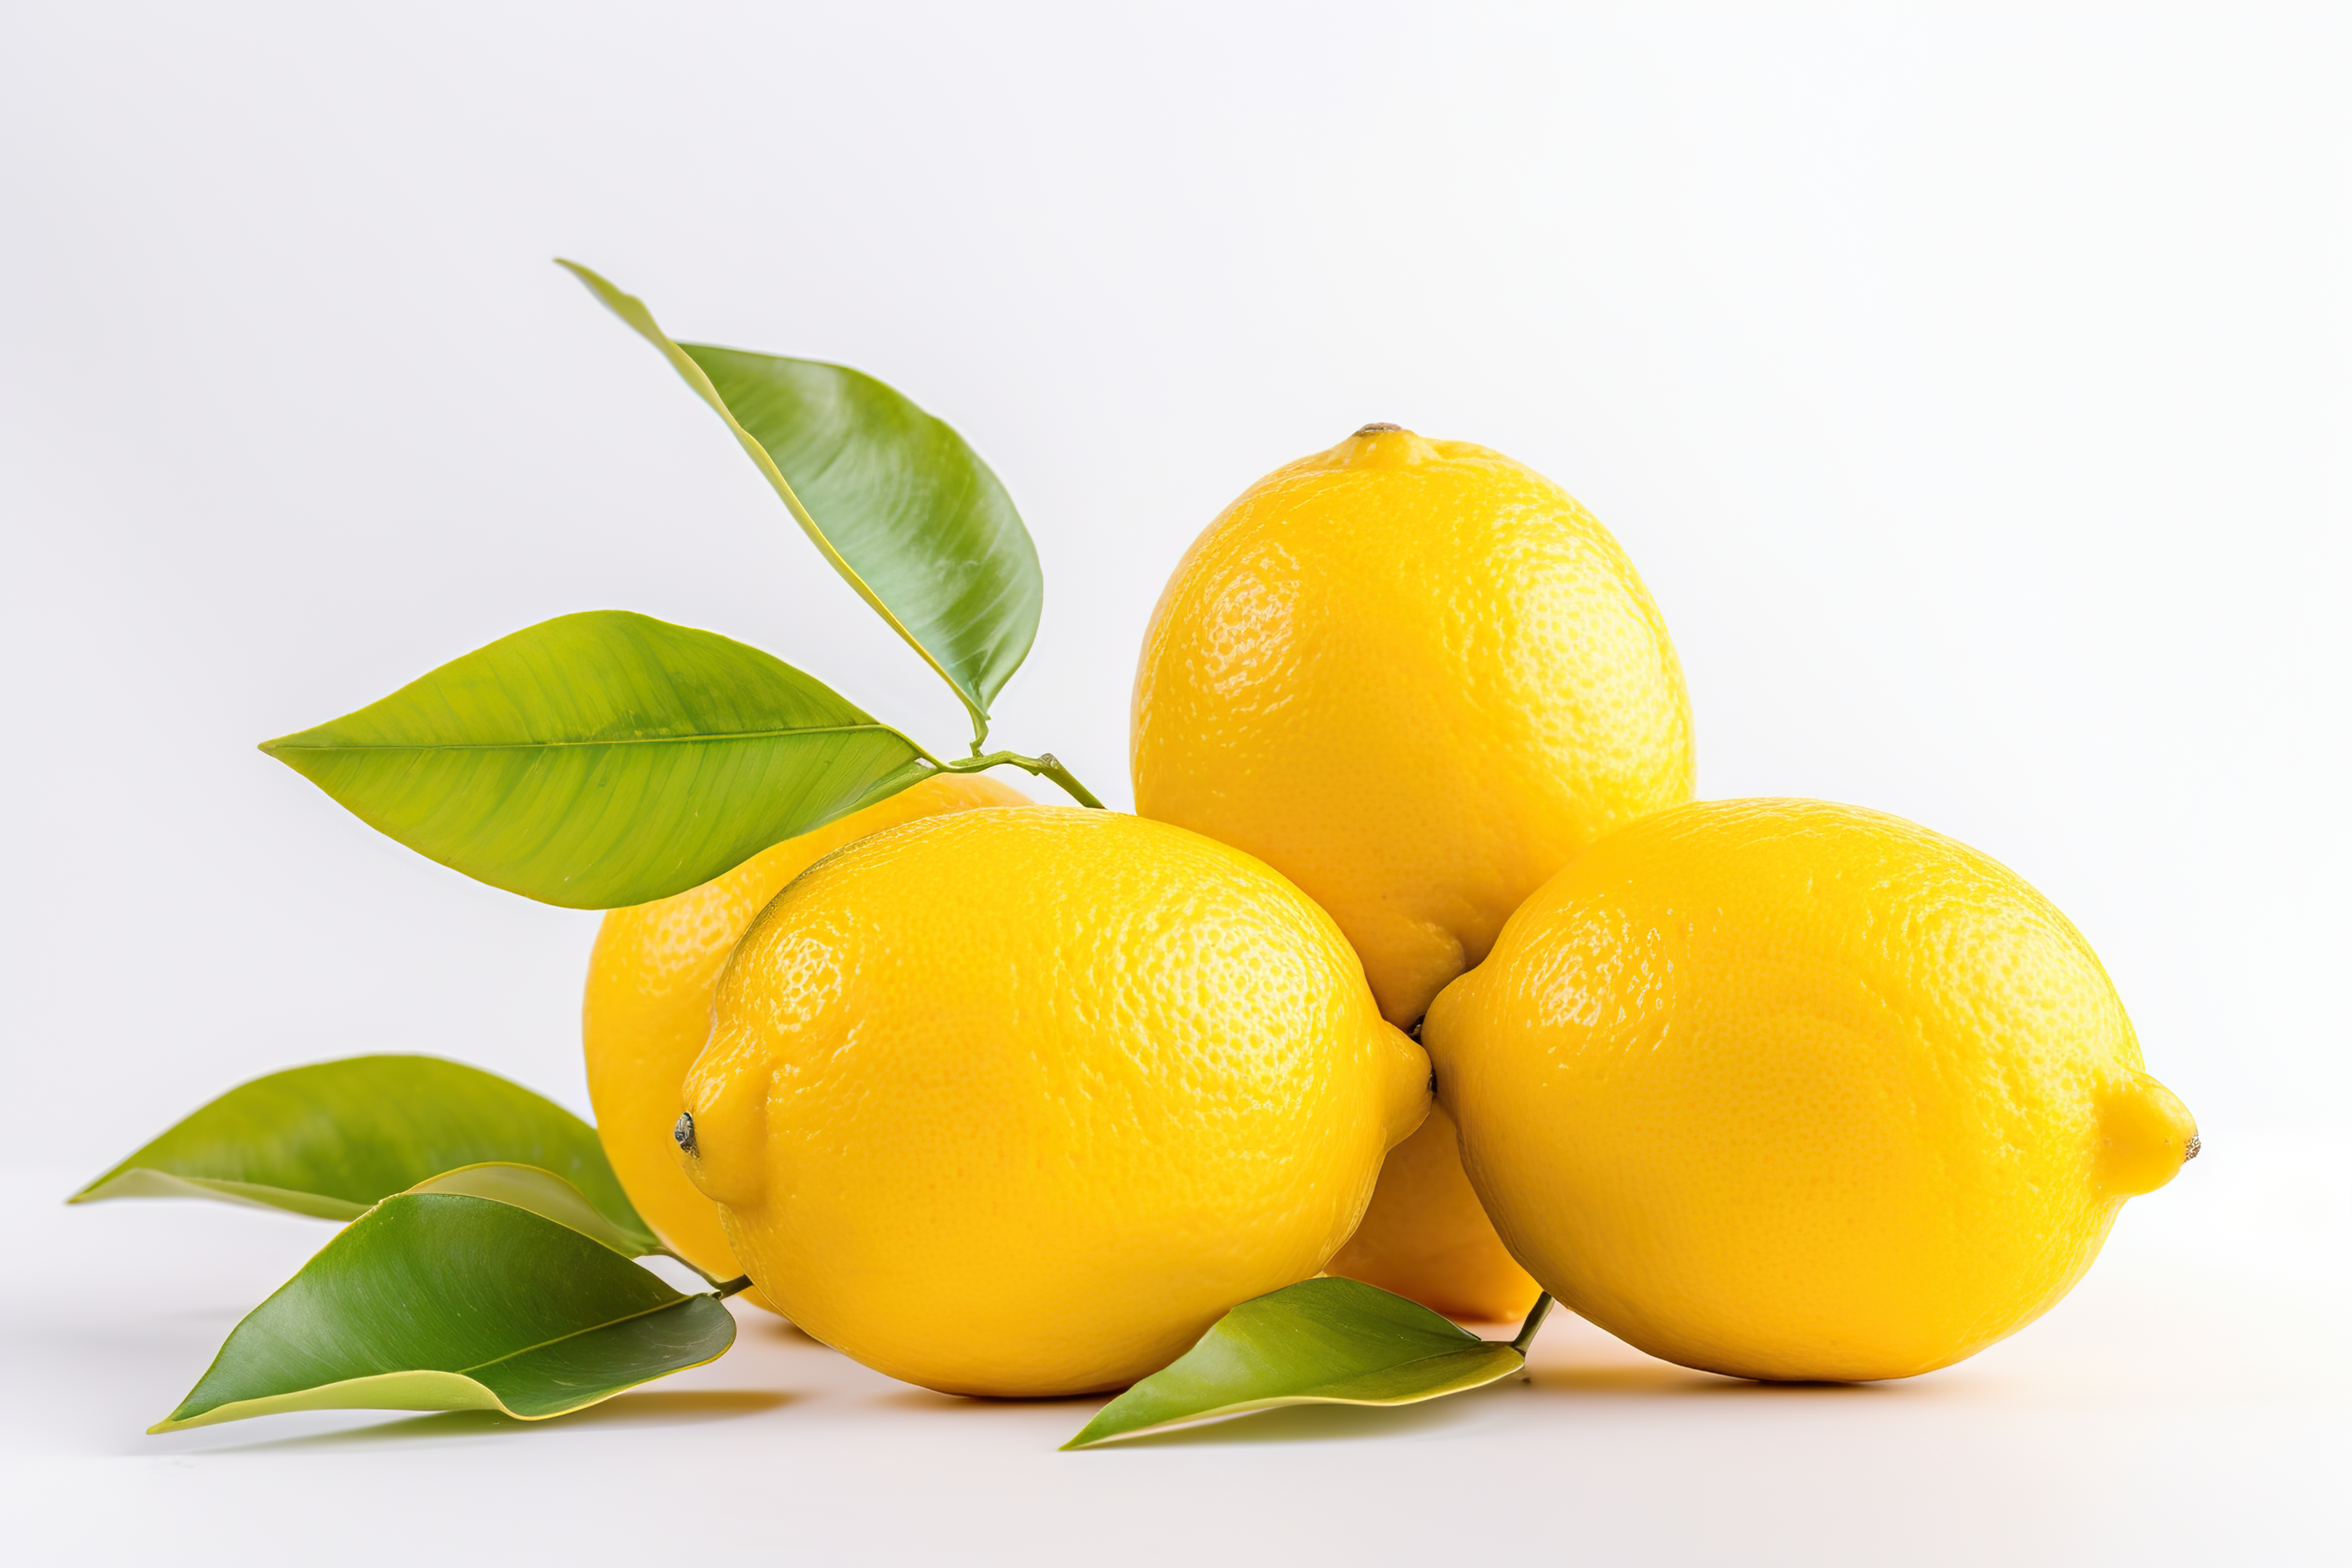 Juicy lemon with leaves isolated on white background